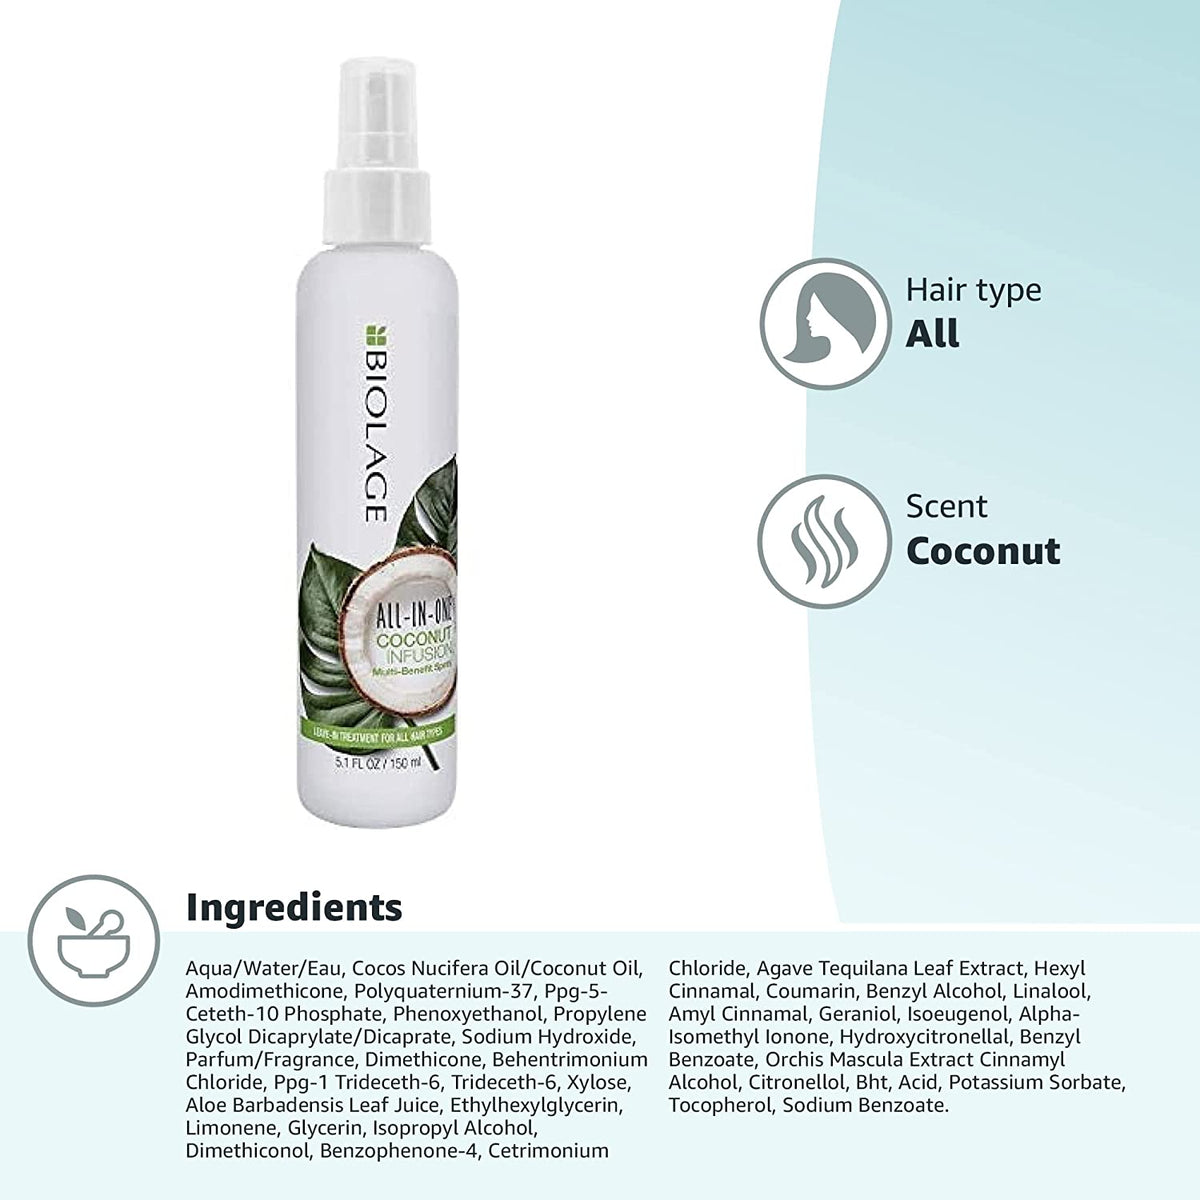 Biolage - ALL-IN-ONE Multi-Benefit Treatment Spray With Coconut 150ml